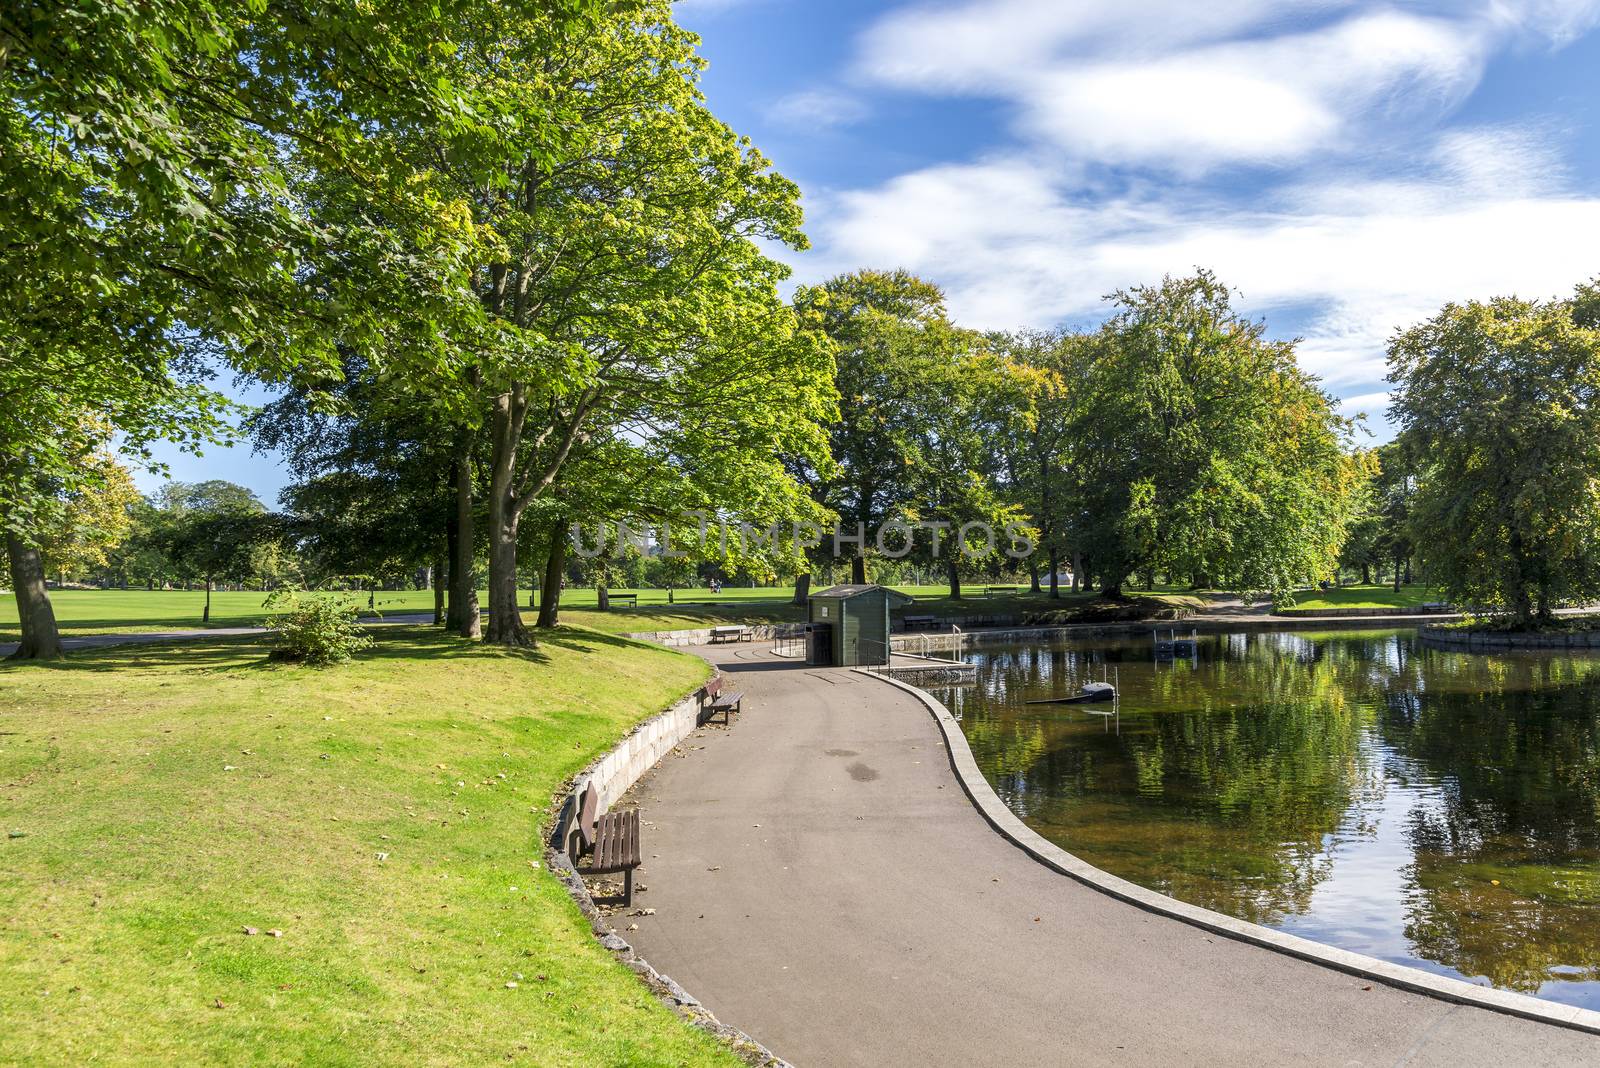 Scenic footpath with benches around a small shallow pond in Duthie Park, Aberdeen, Scotland